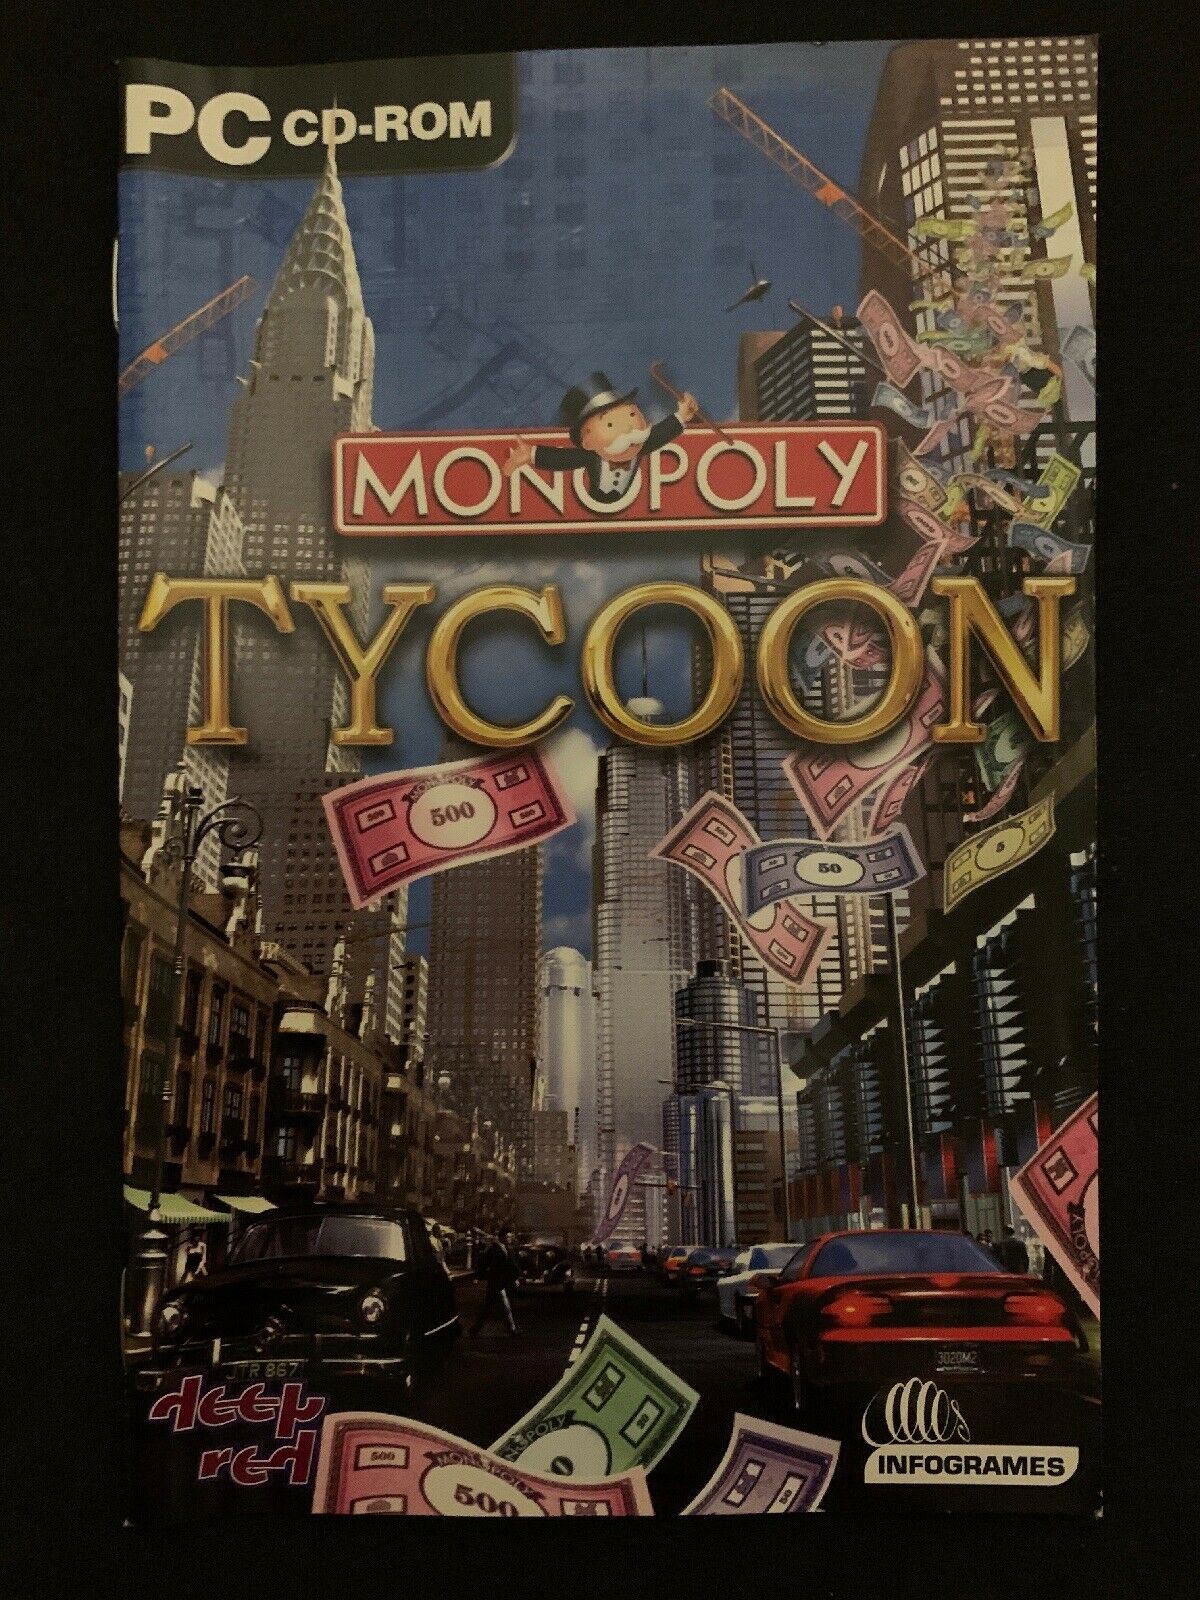 Monopoly Tycoon PC CD-ROM Management Sim Strategy Guide 2001